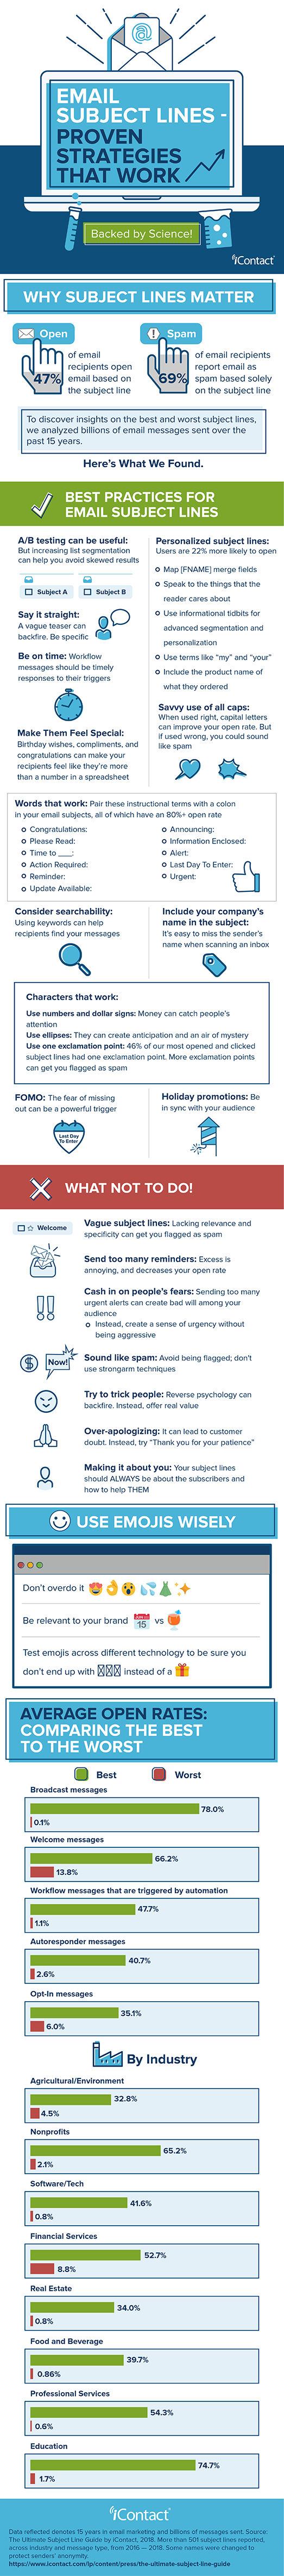 Email subject lines - infographic